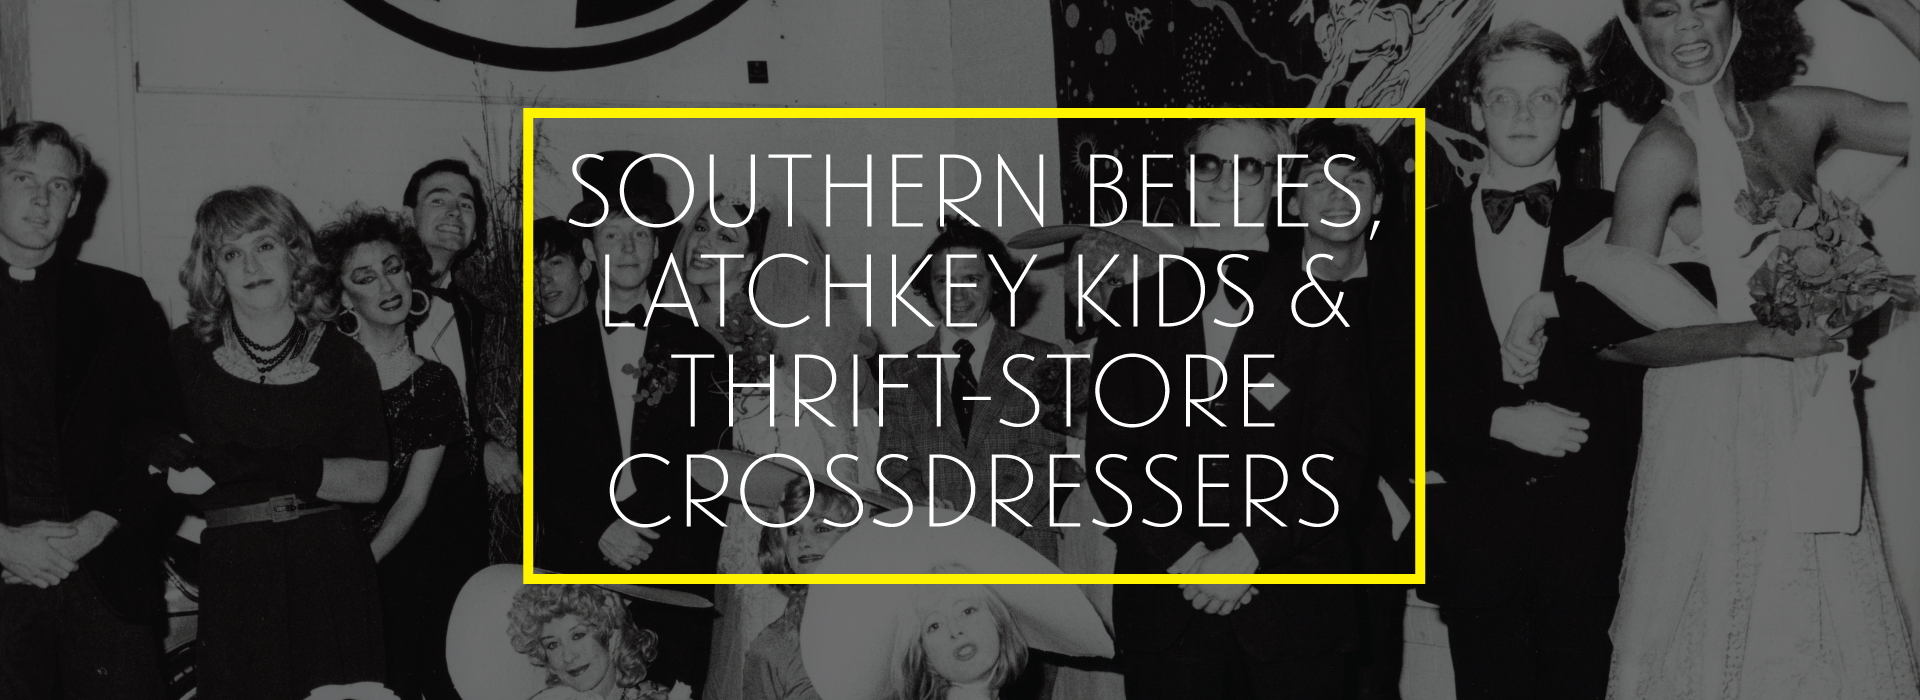 Southern Belles Latchkey Kids And Thrift Store Crossdressers